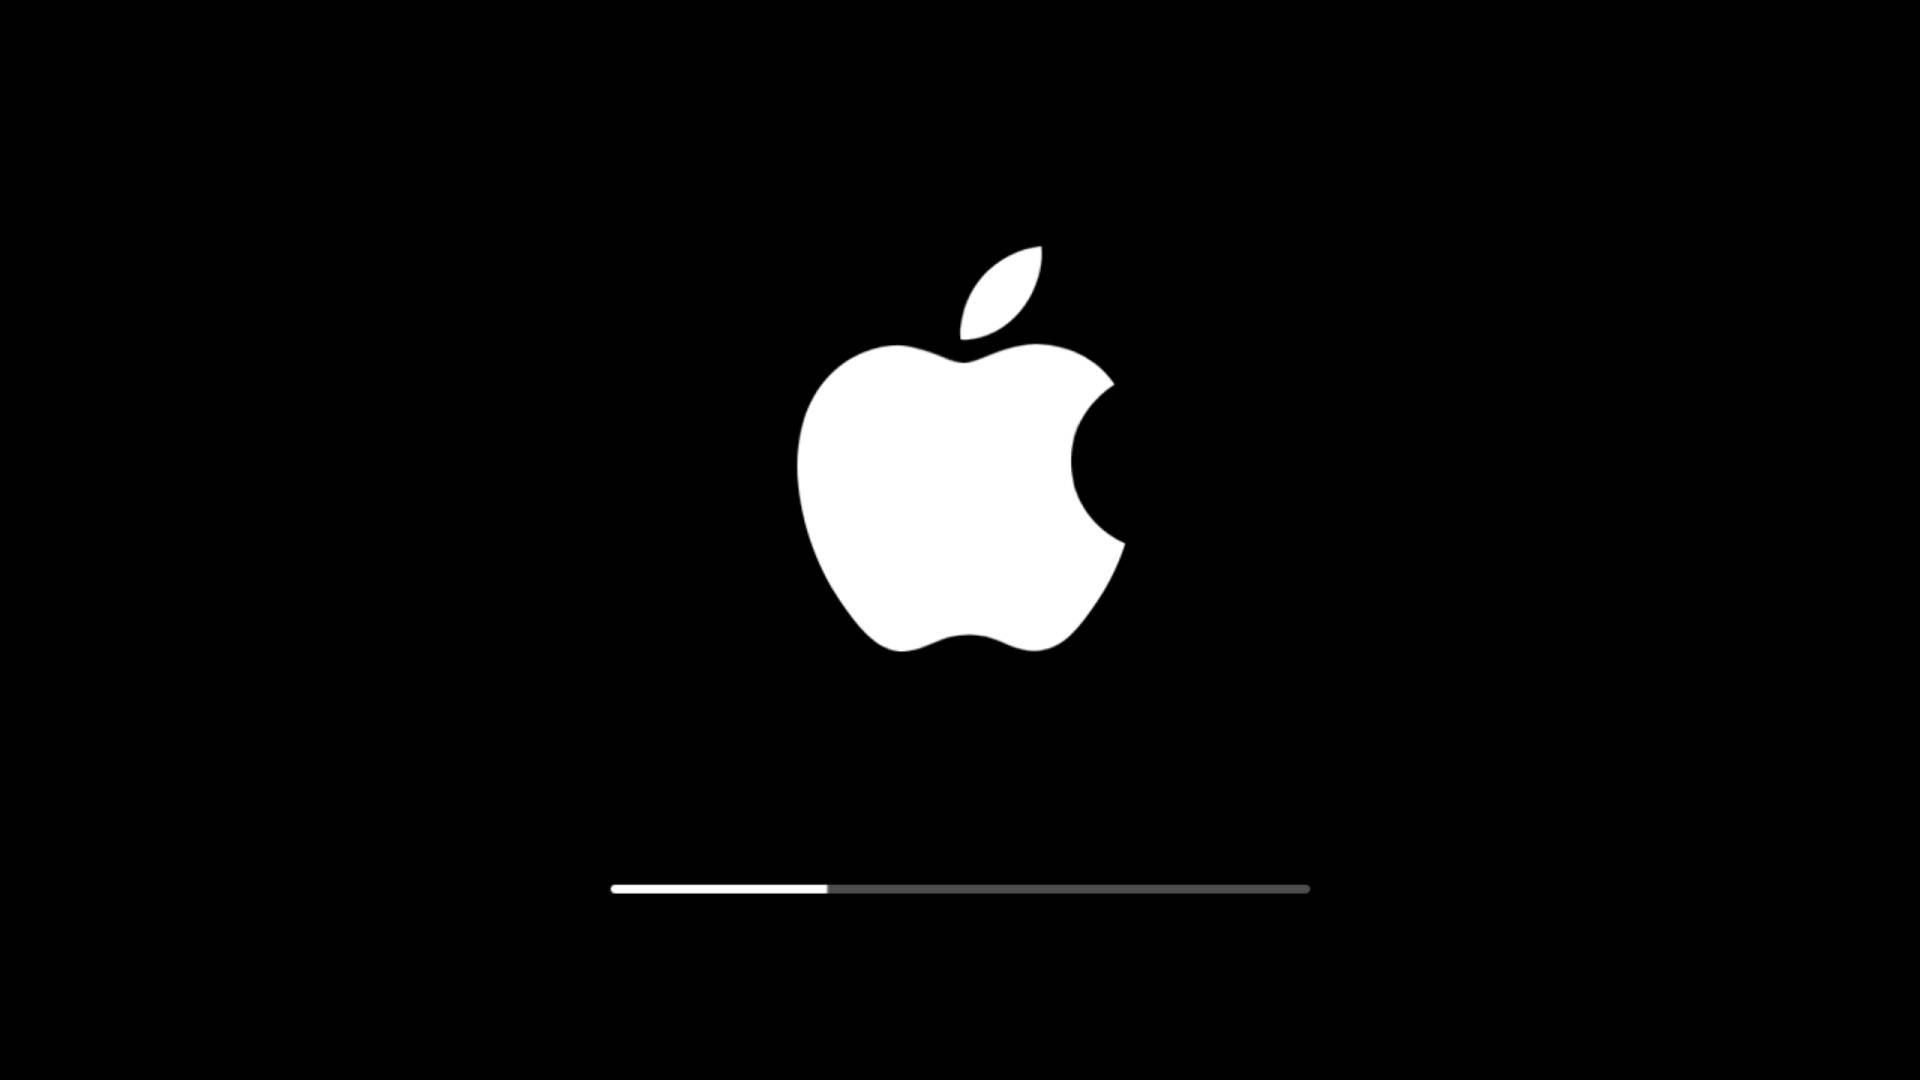 Apple Logo Loading Screen Picture